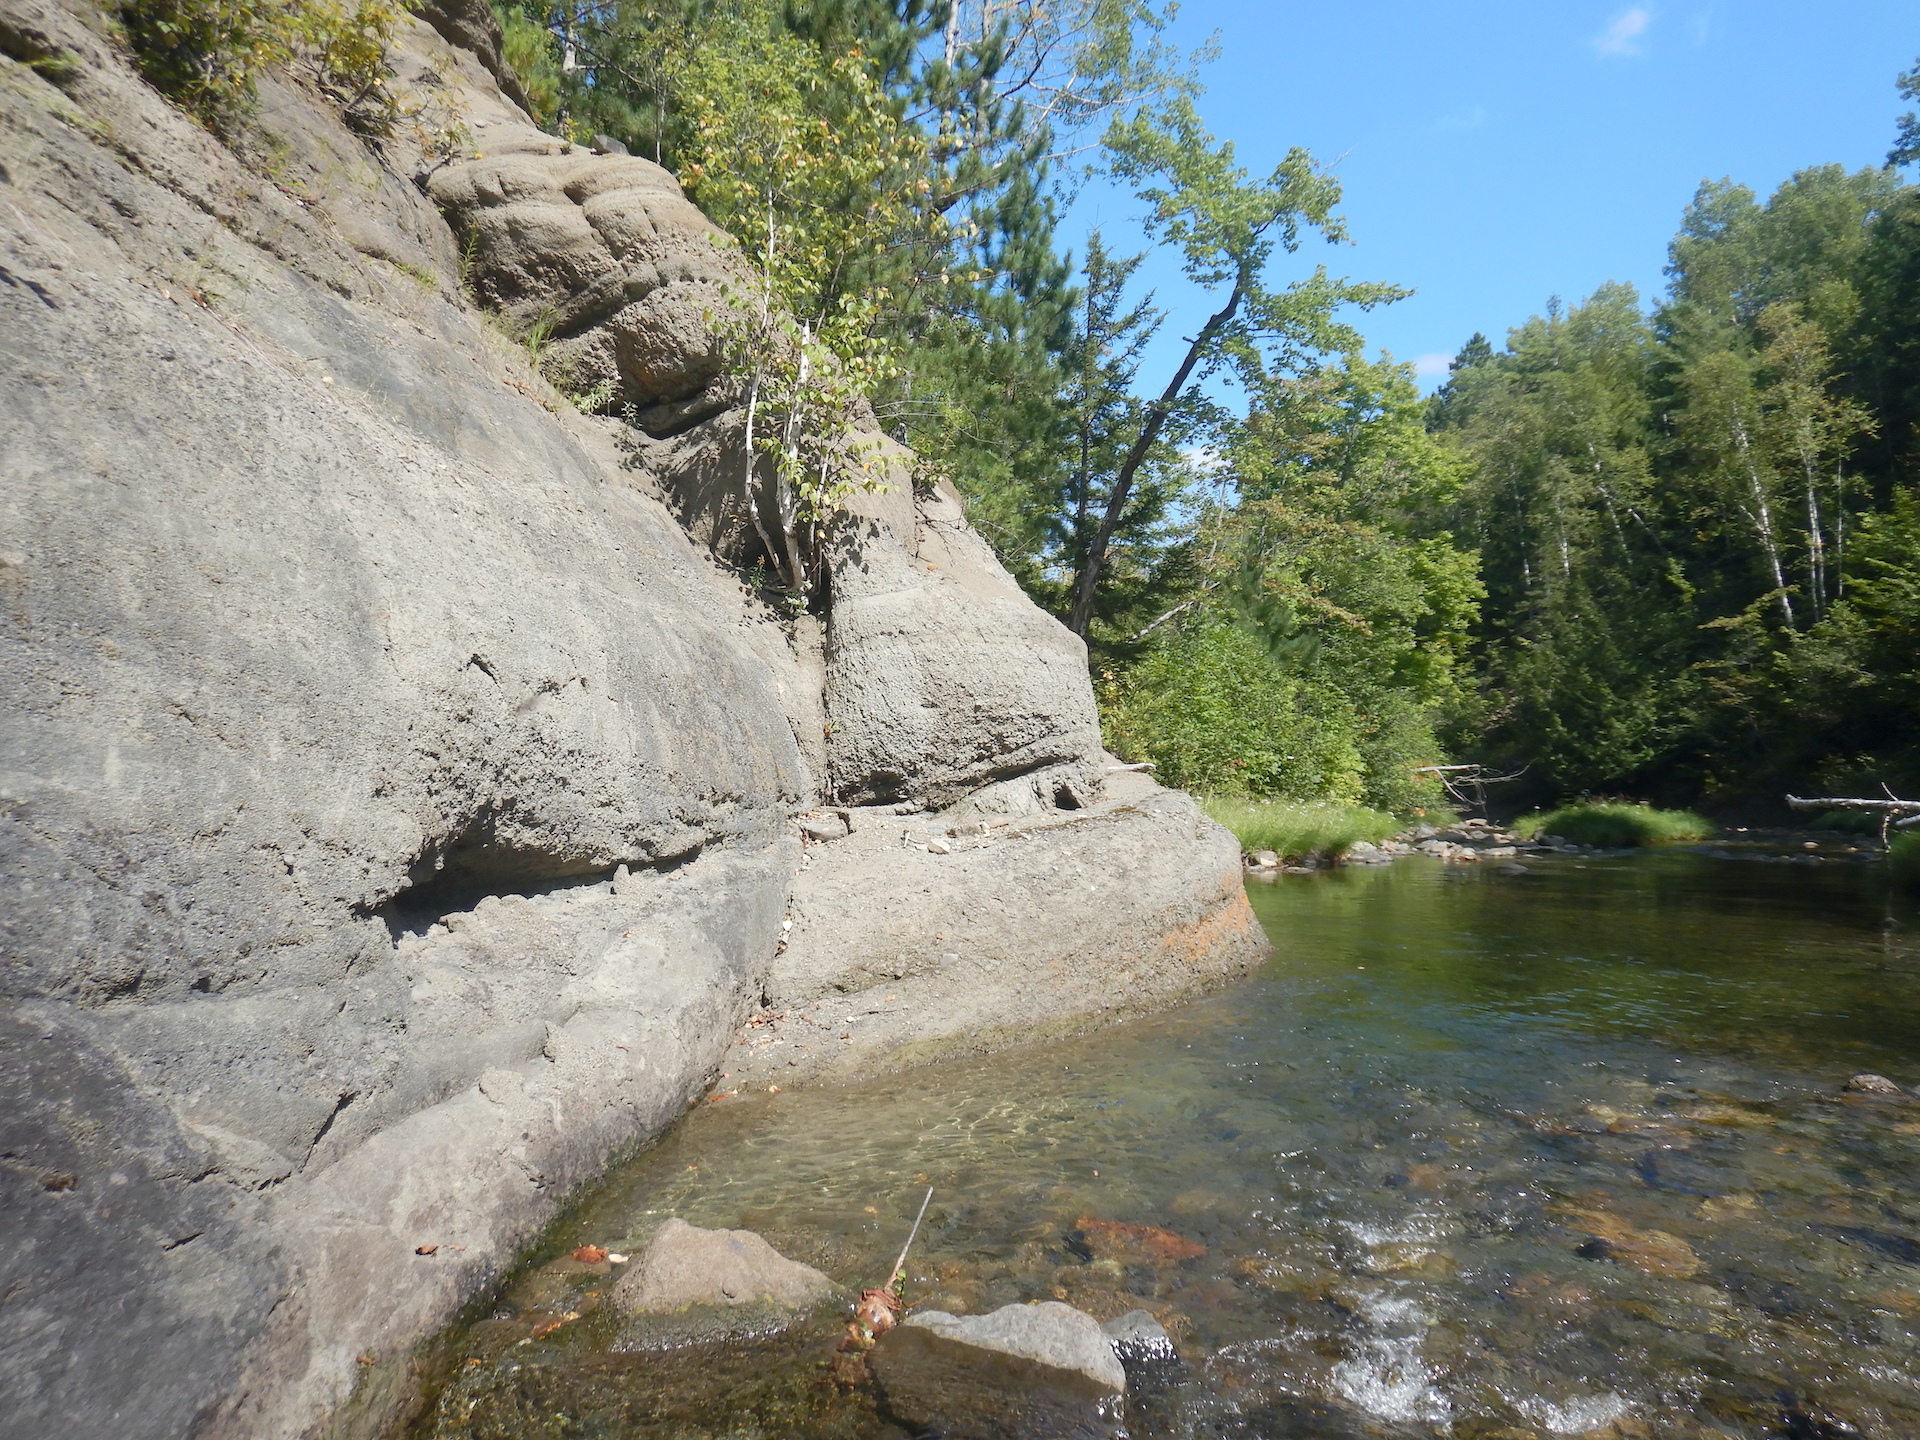 Steam flowing past a wall of gray rock. The rock wall is at left. The stream flows from lower right to center right.